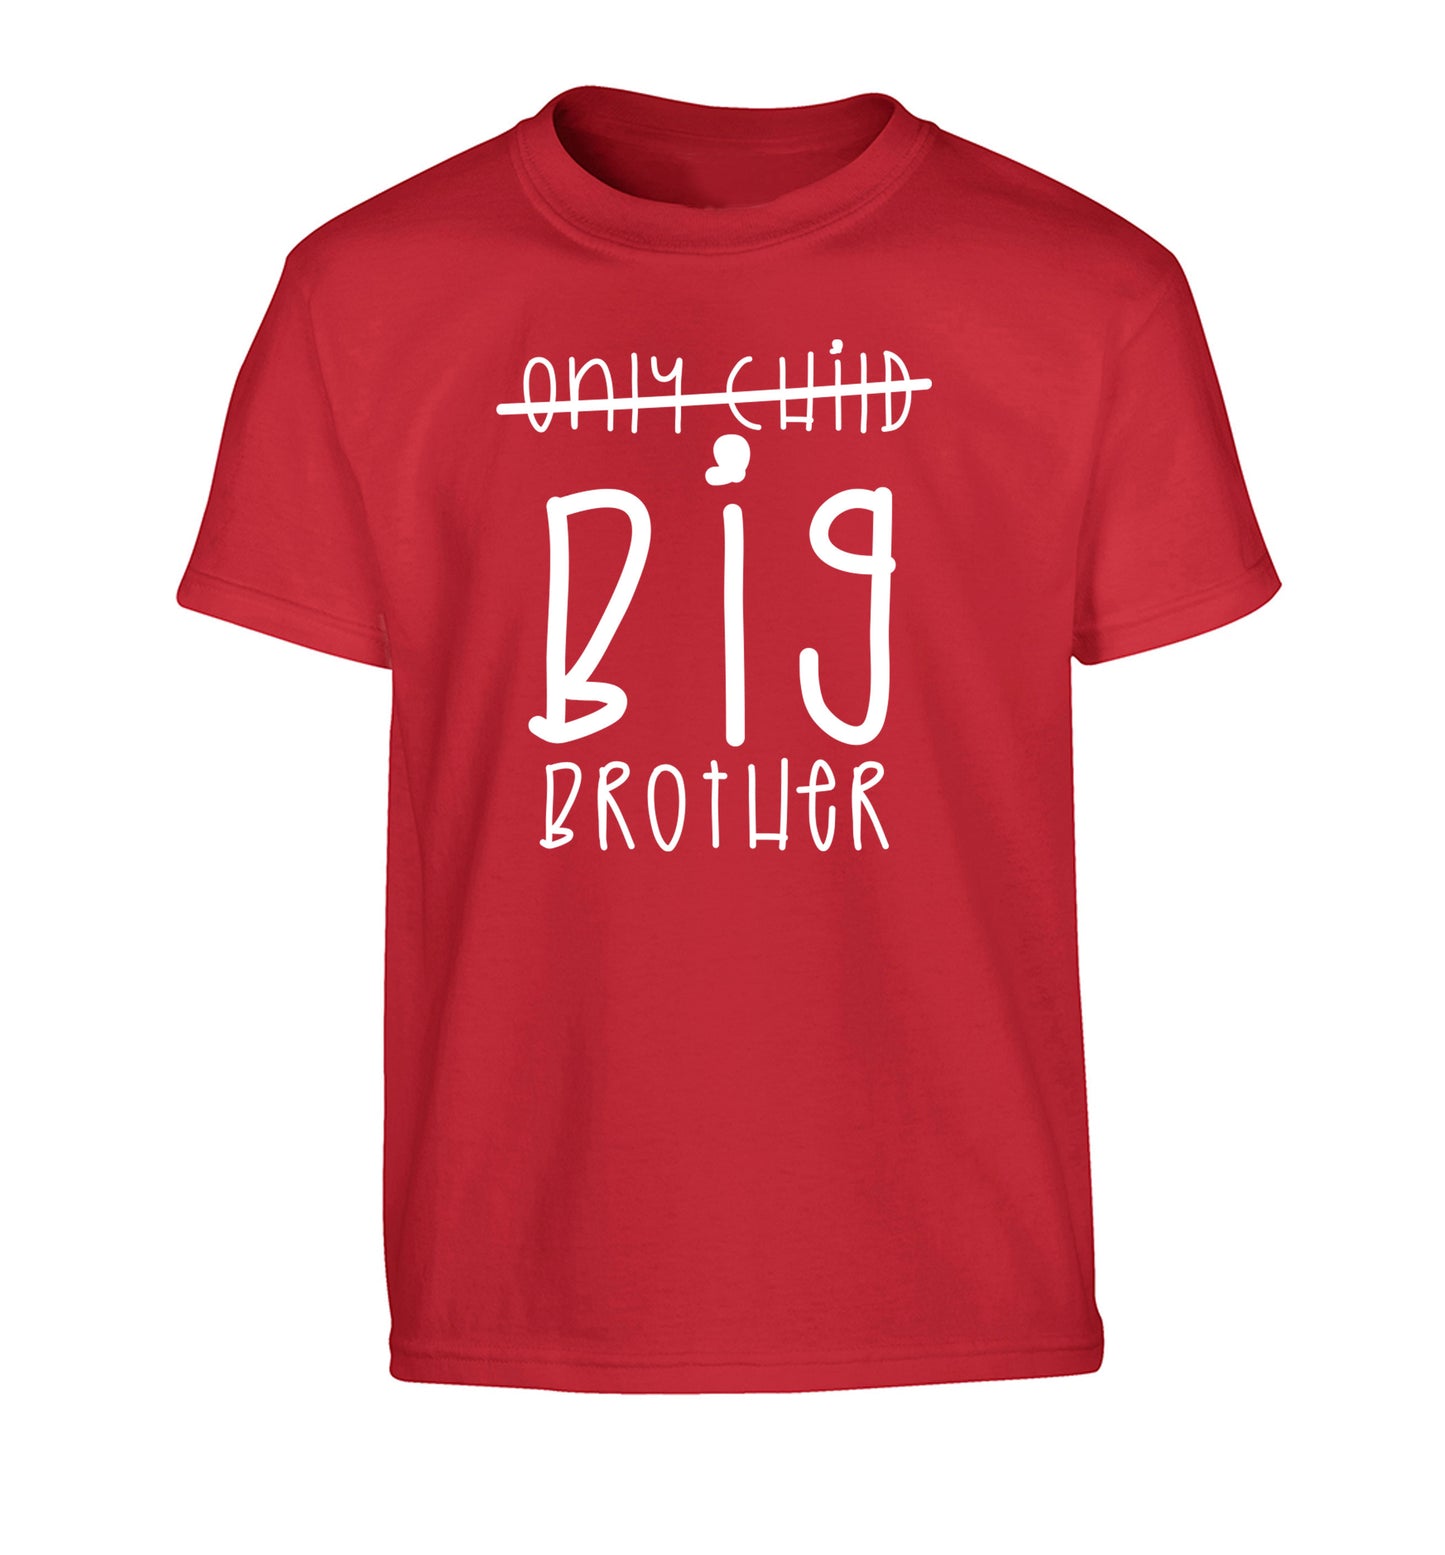 Only child big brother Children's red Tshirt 12-14 Years